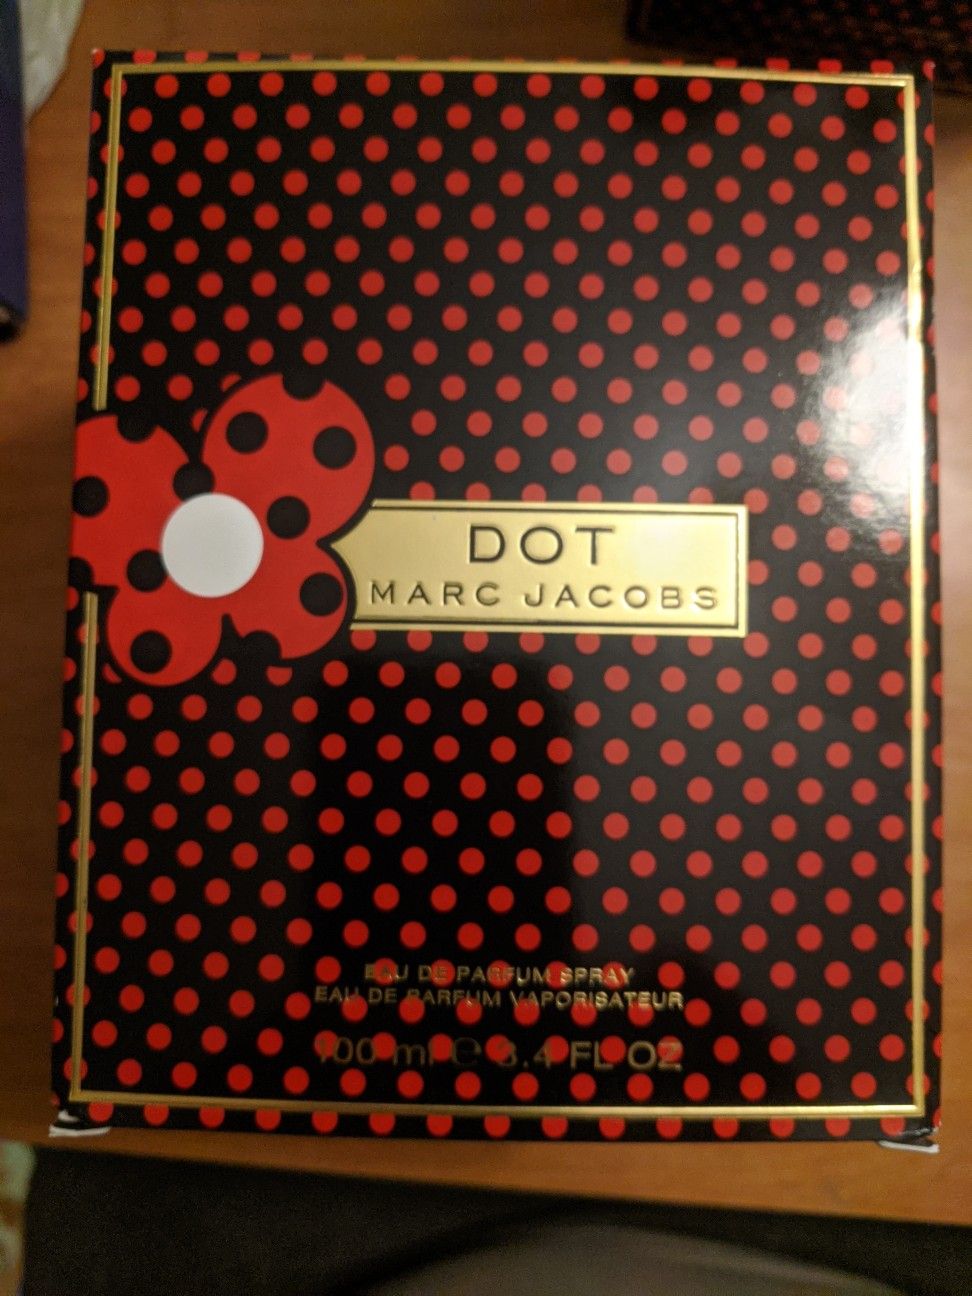 Dot by Marc Jacobs 3.4fl oz / 100 mL - New Unsealed